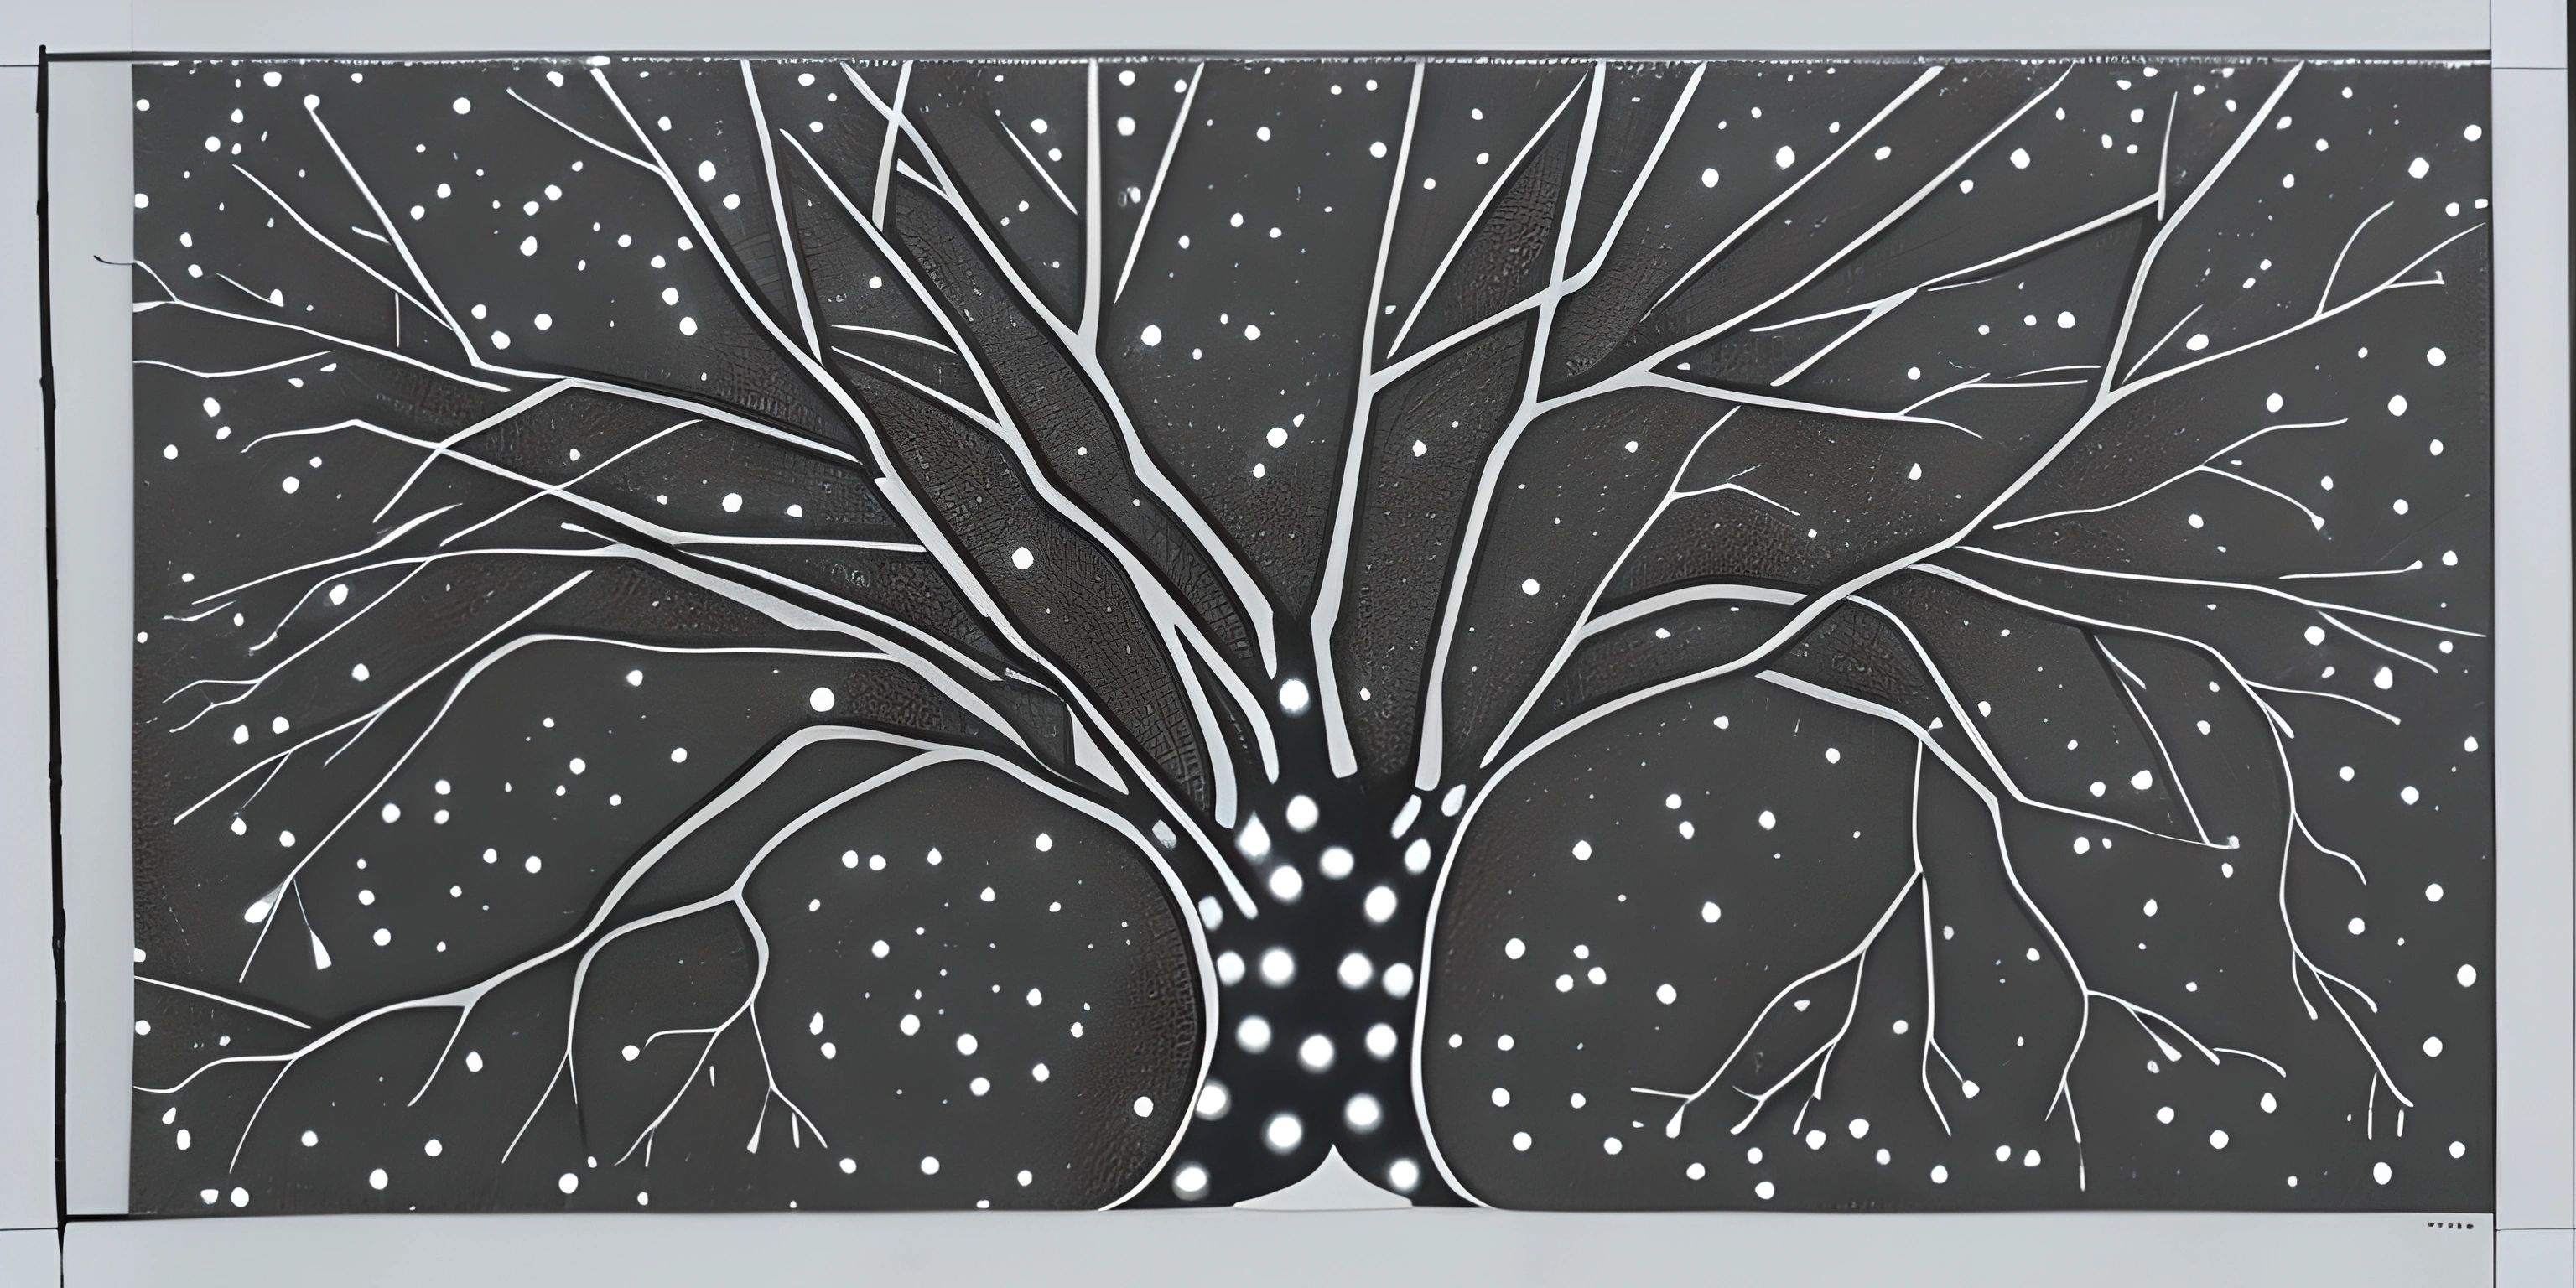 a picture of an art work with a tree with white branches in the background and snow on the ground